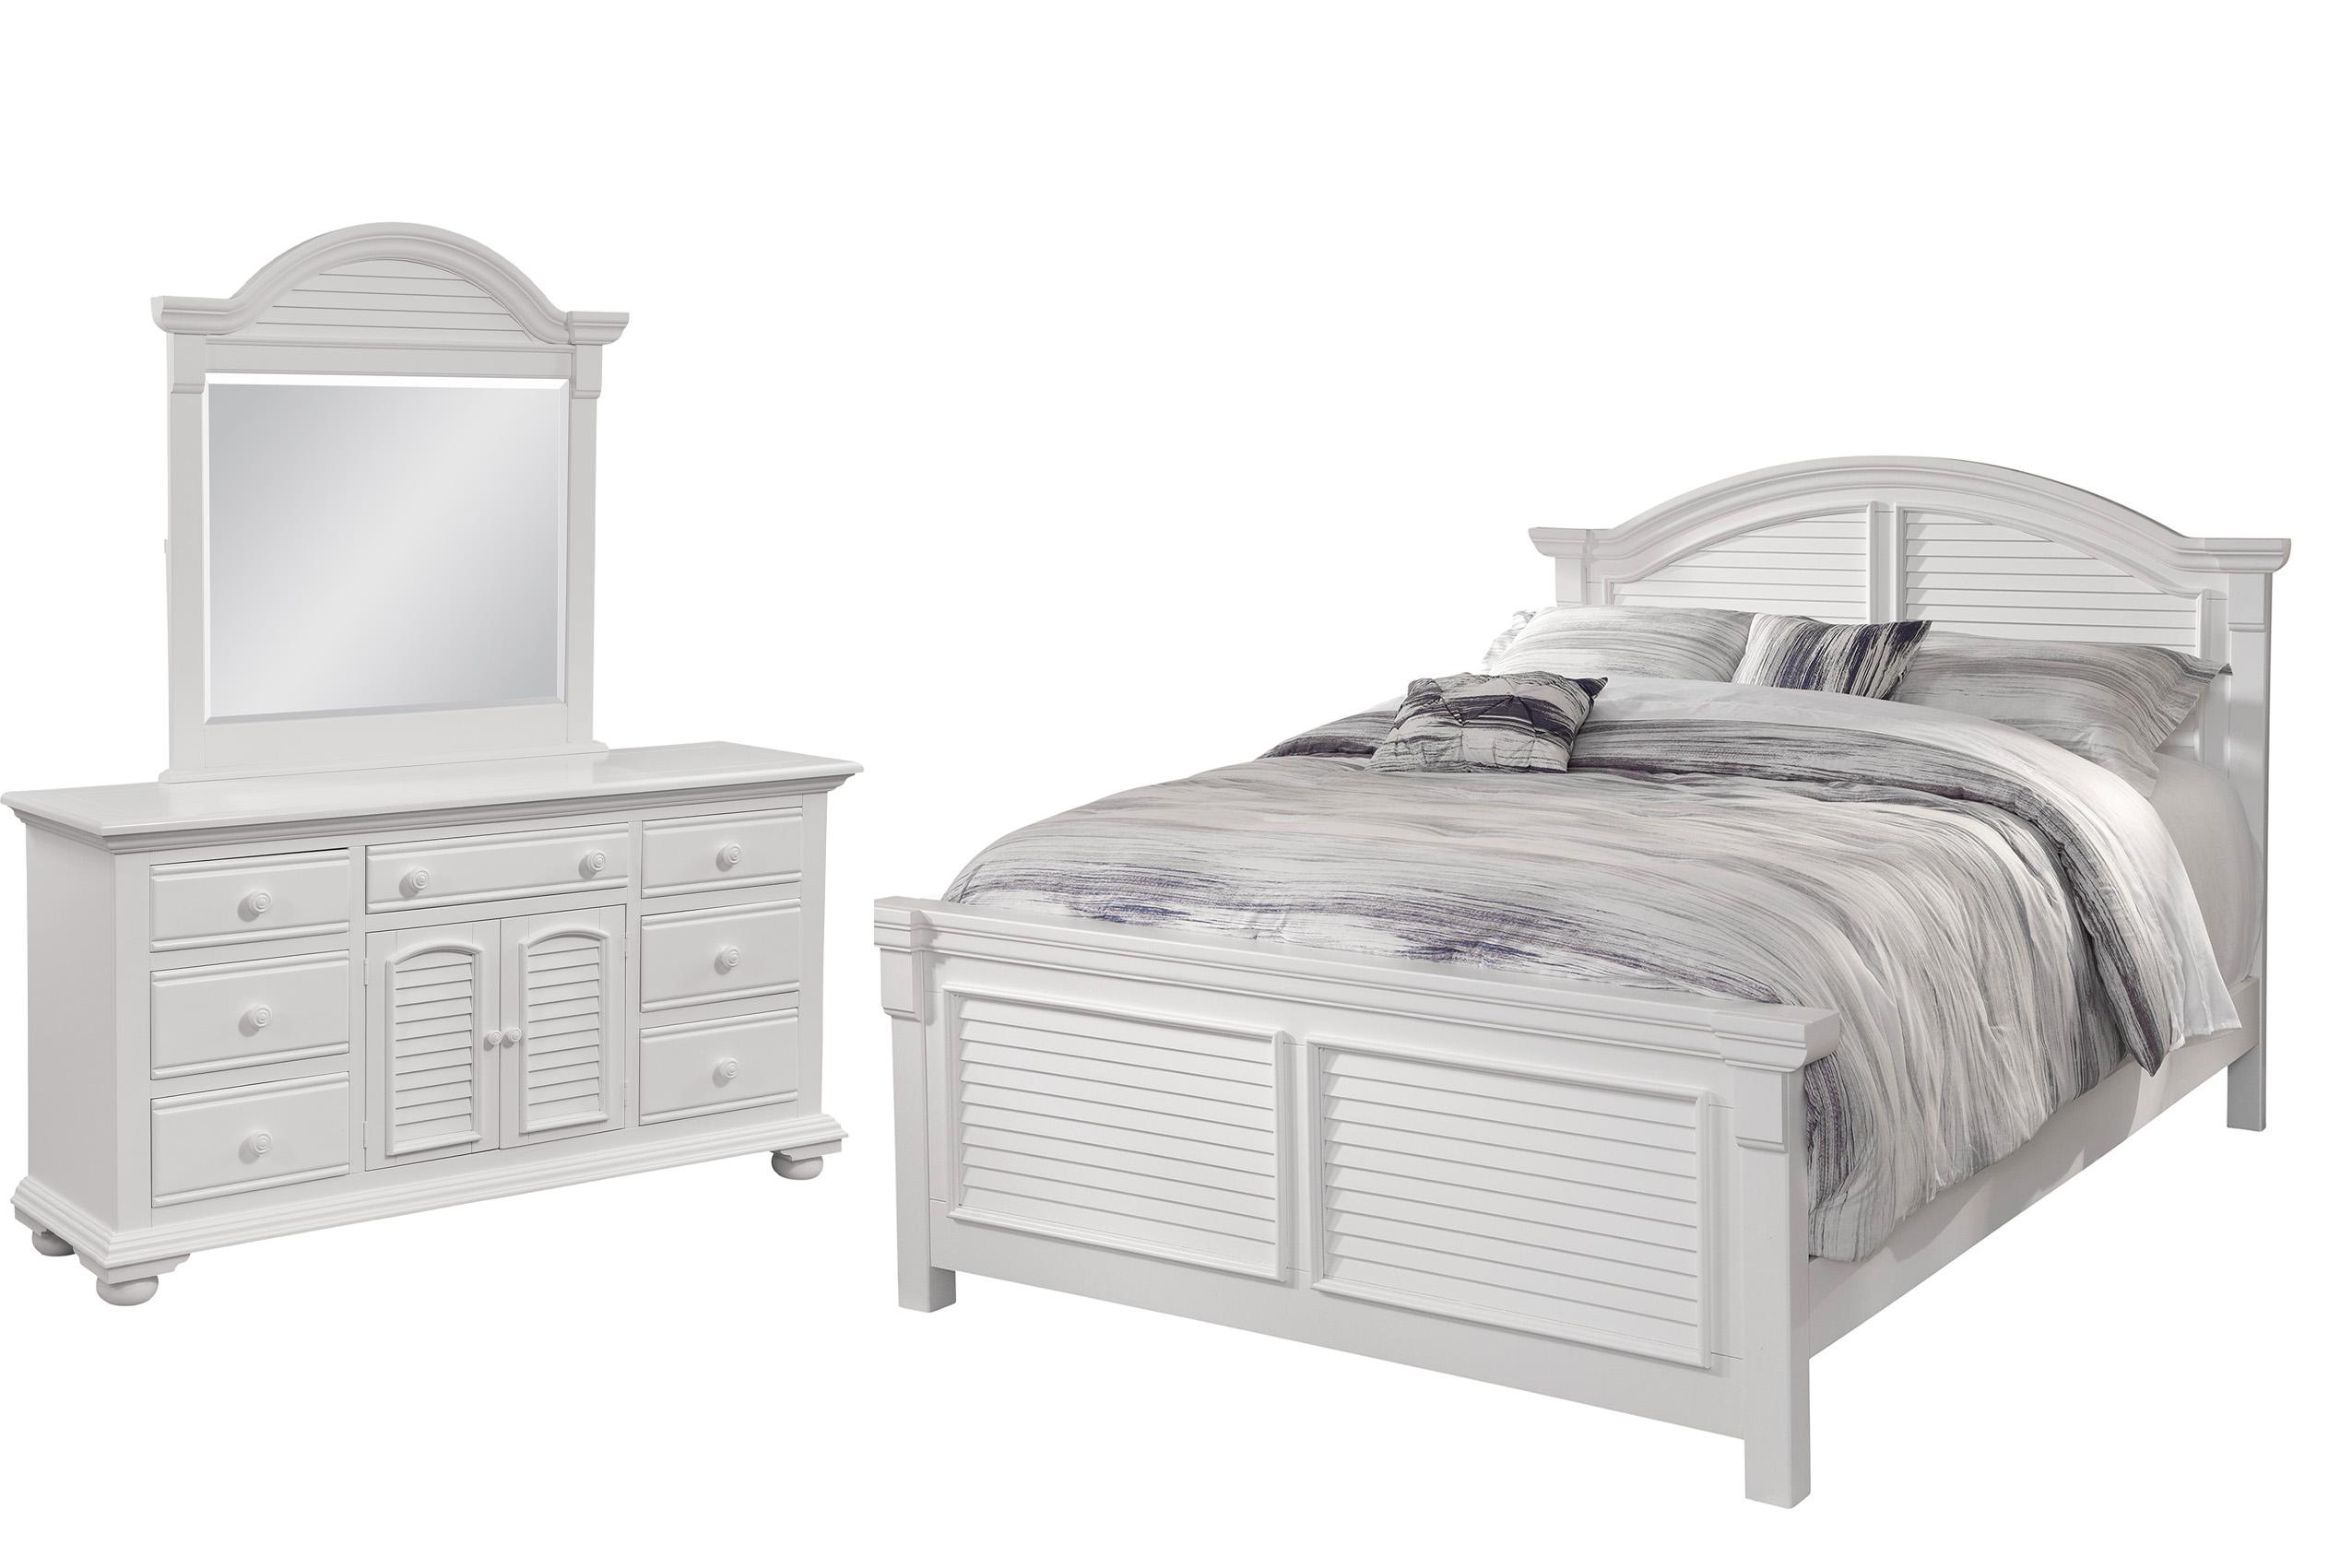 Classic, Traditional, Cottage Panel Bedroom Set COTTAGE 6510-50PAN 6510-QARPN-3PC-Small Way in White 